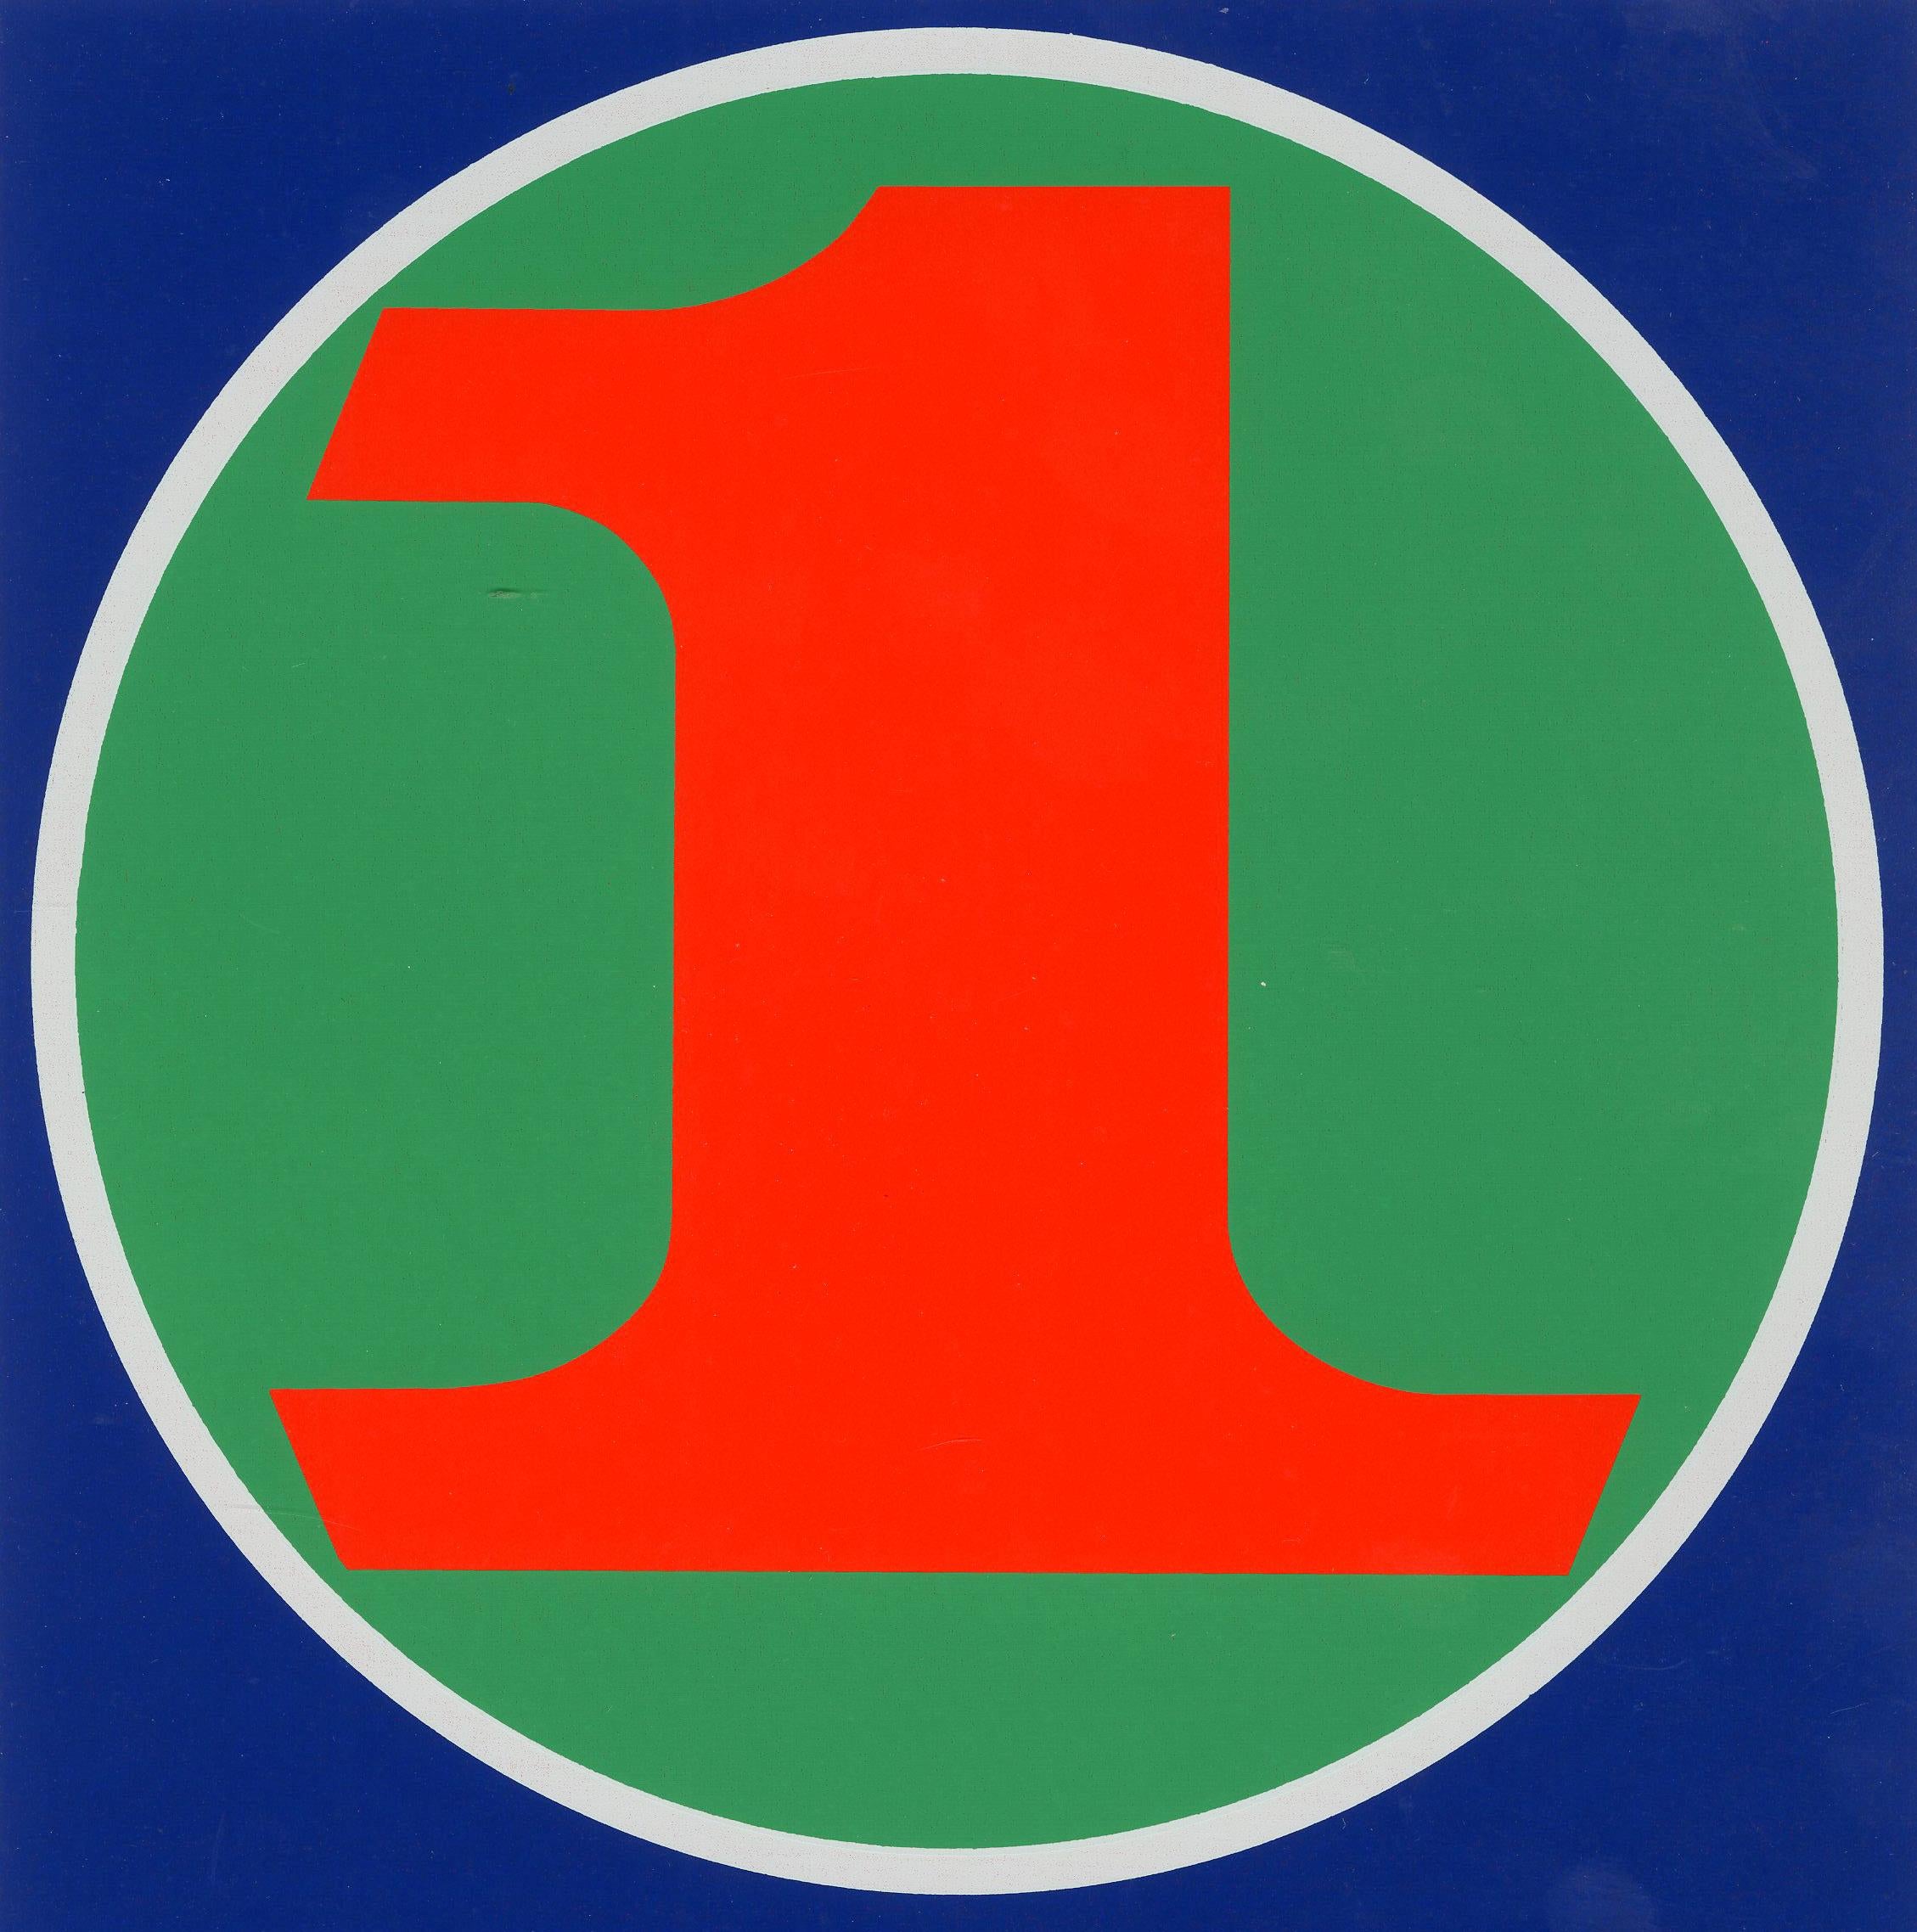 One - Print by Robert Indiana